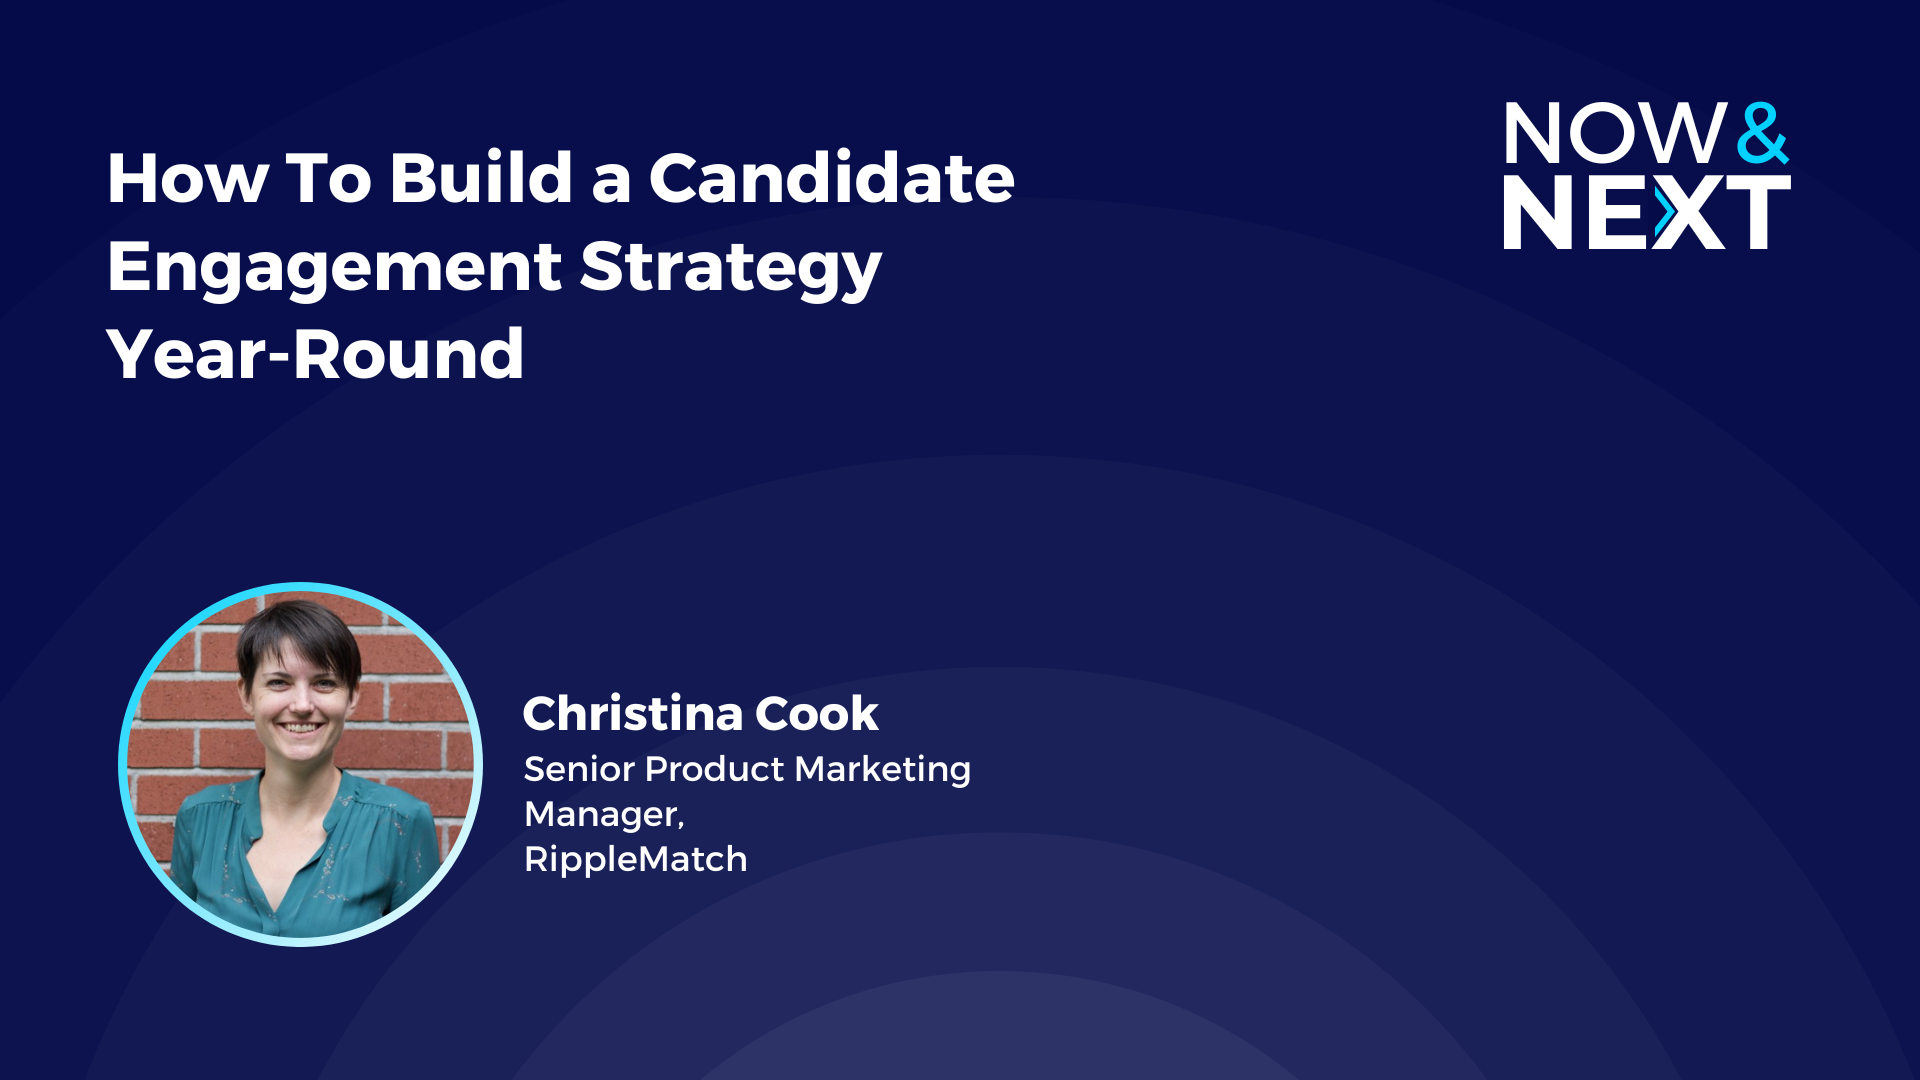 How To Build a Candidate Engagement Strategy